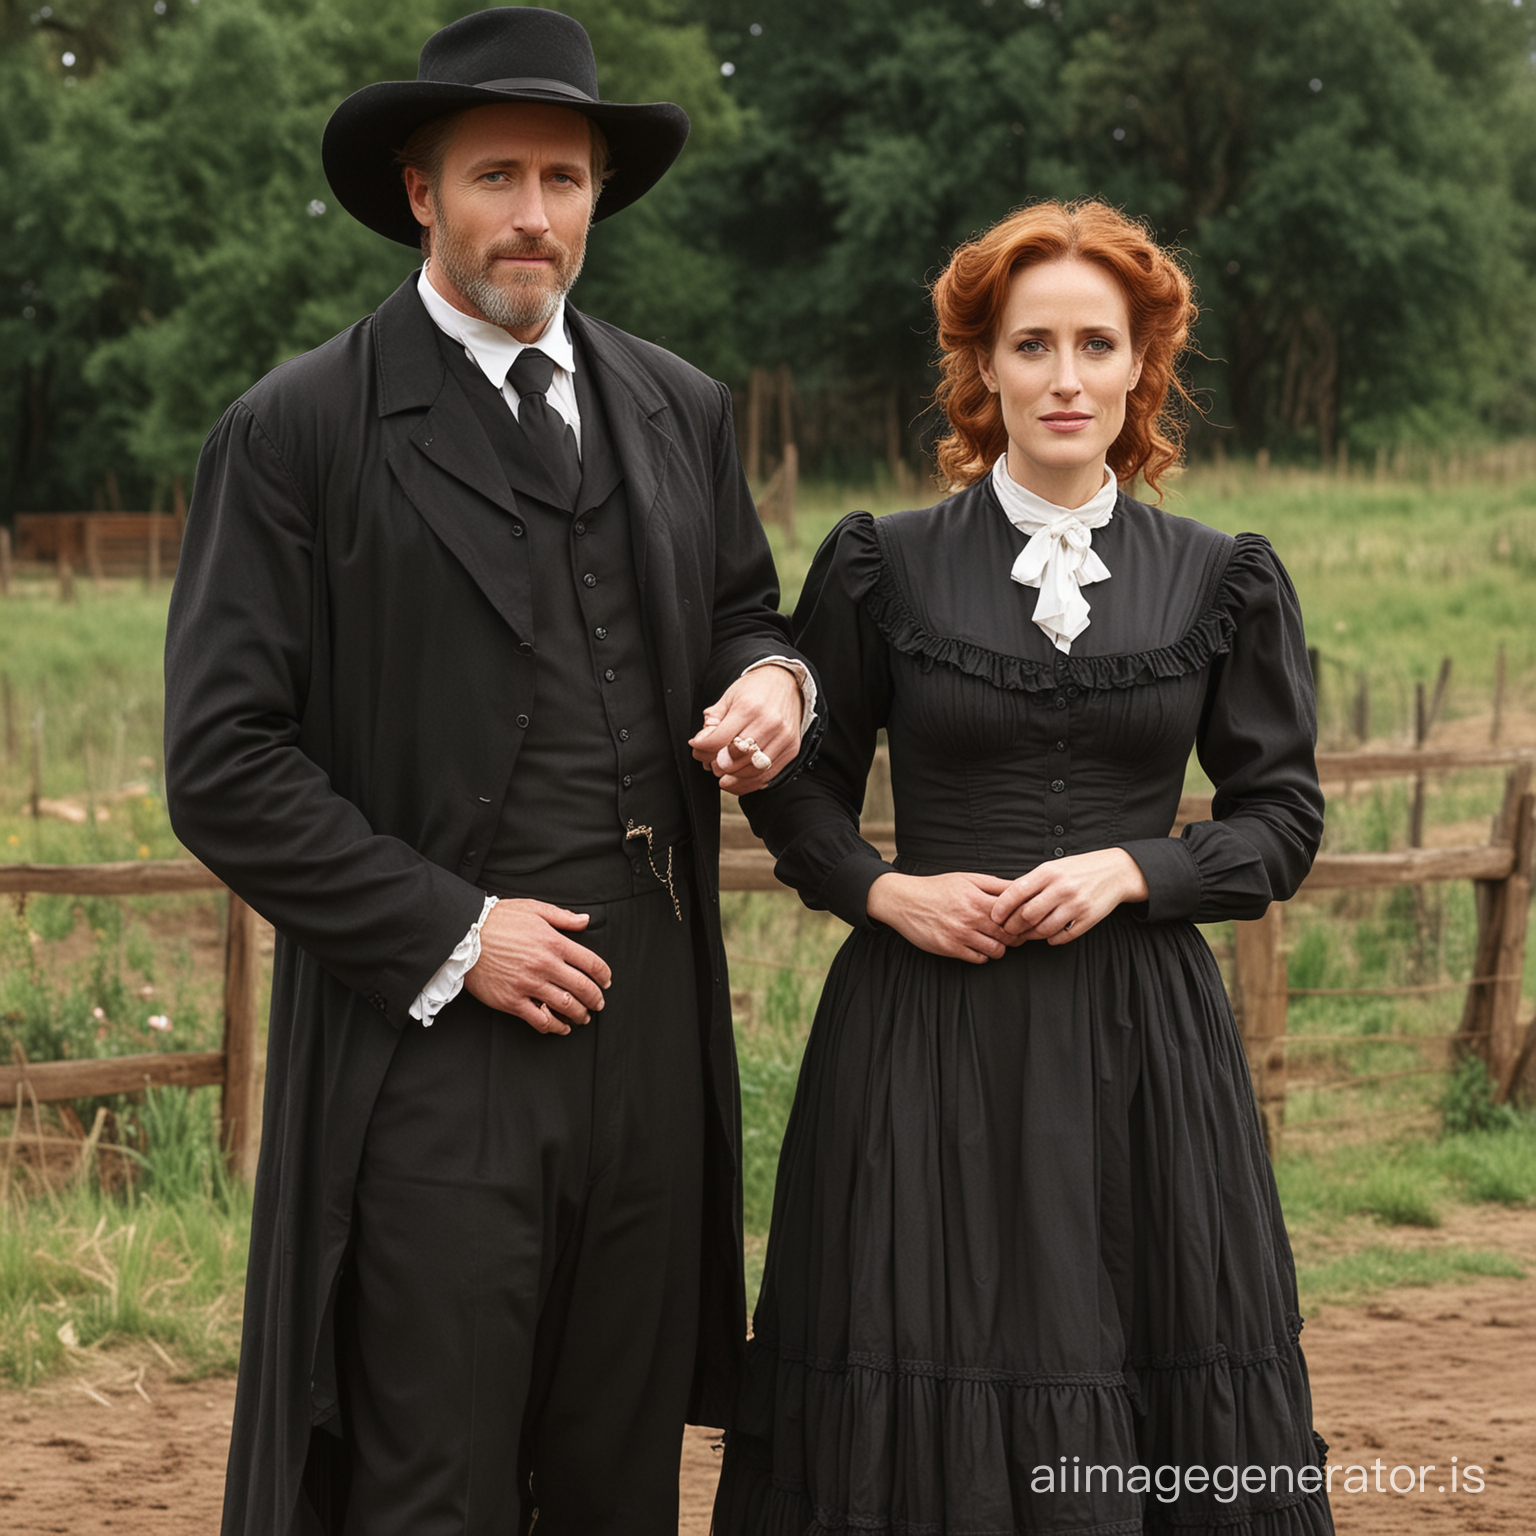 red haired Gillian Anderson dressed as an old west farmer's wife wearing a black floor-length loose billowing old west poofy modest dress with layers of petticoats a long apron and a frilly bonnet hand in hand with an old farmer dressed into a black suit who seems to be her newlywed husband